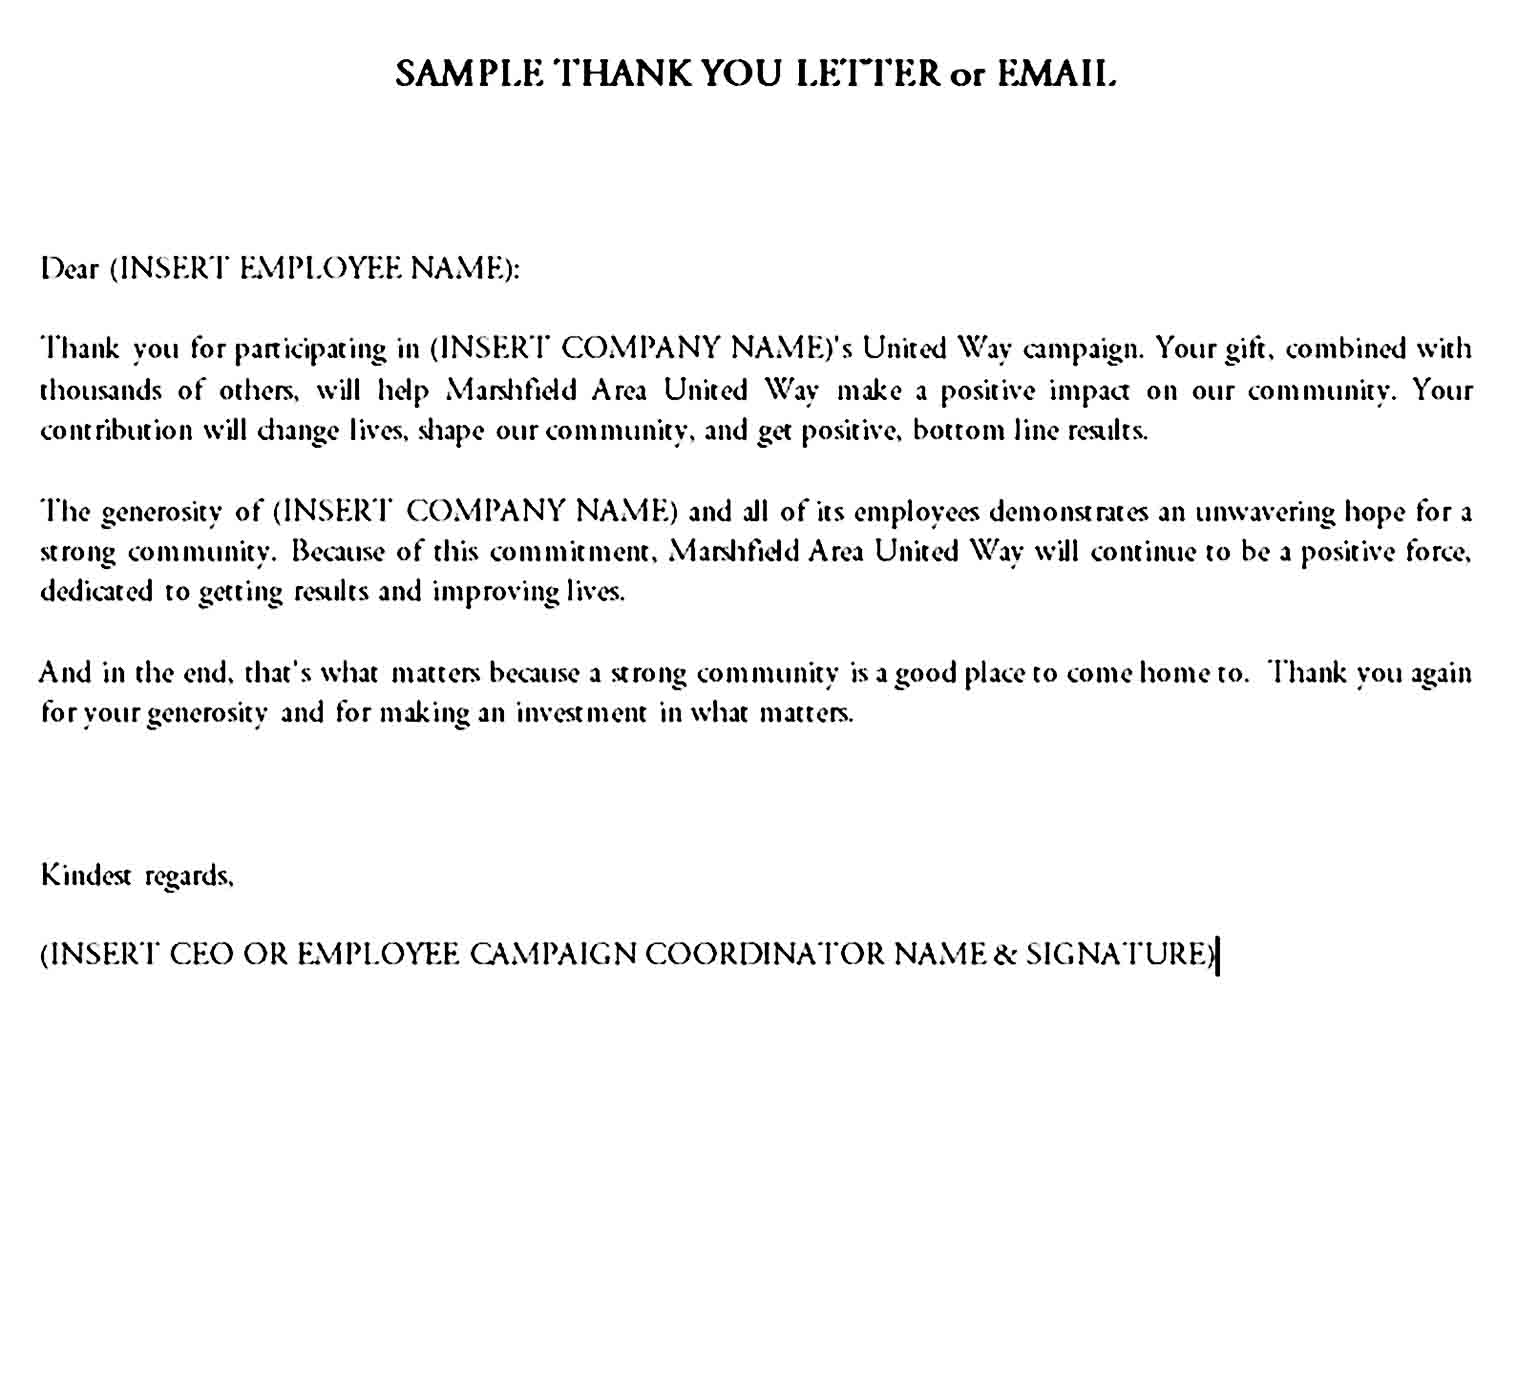 Thank you letter 11